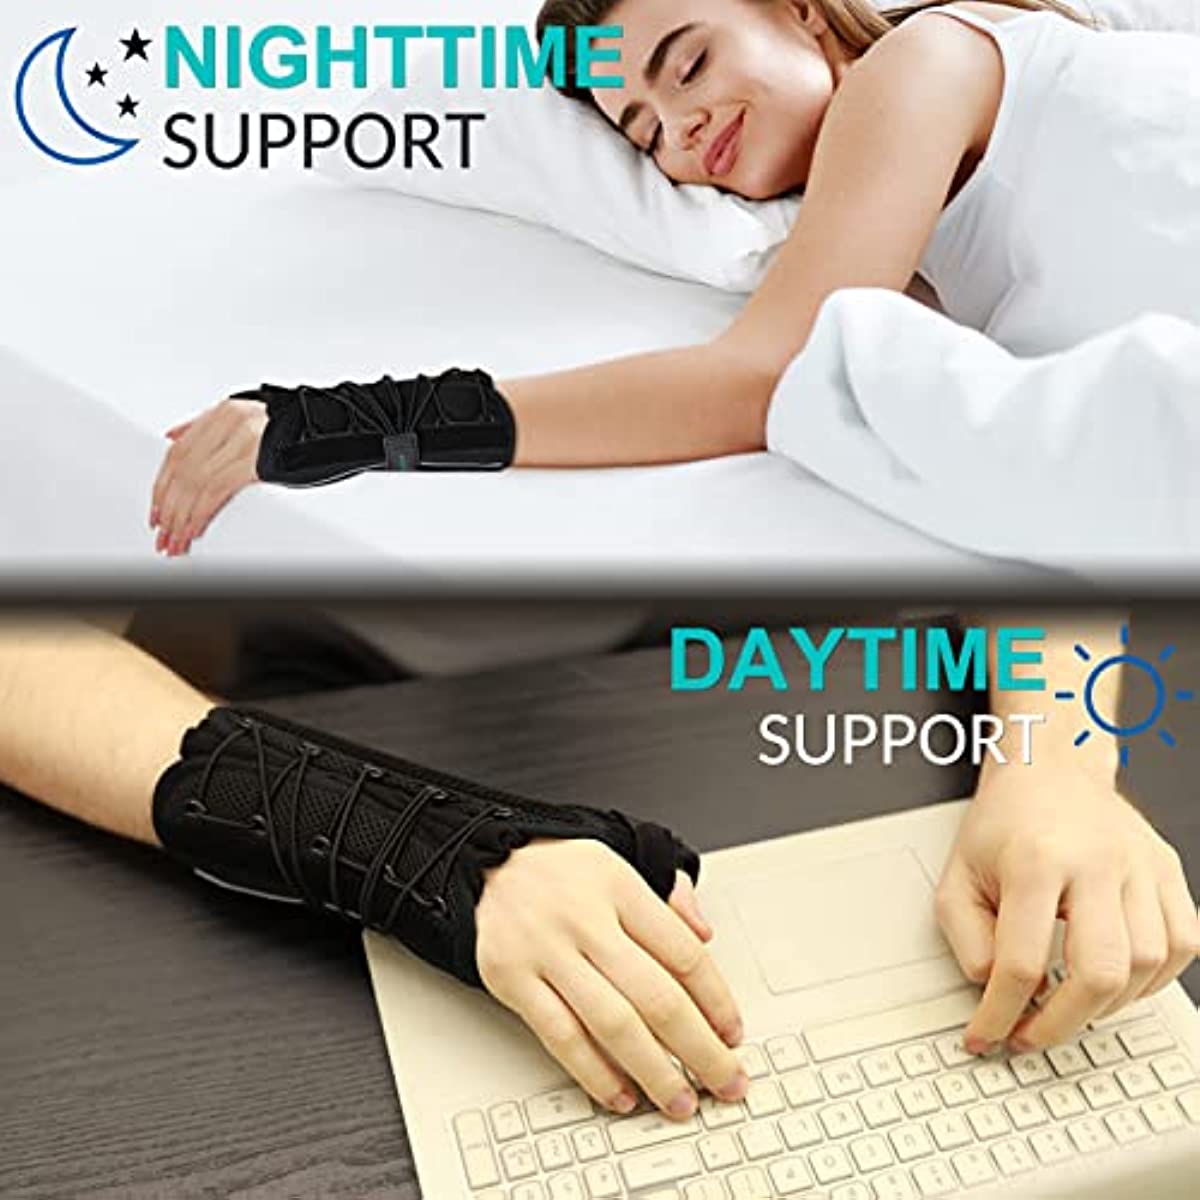 TANDCF bestlife Unisex Universal Wrist Lacer Thumb Spica Splint for Carpal Tunnel Syndrome & De Quervain’s Syndrome,Adjustable Night Wrist Thumb Support Brace with Splints Right Hand For Women & Men,Great for Tendonitis,Arthritis,Wrist Pain,Sprain,Sports Injuries,Joint Instability(Left,XL)